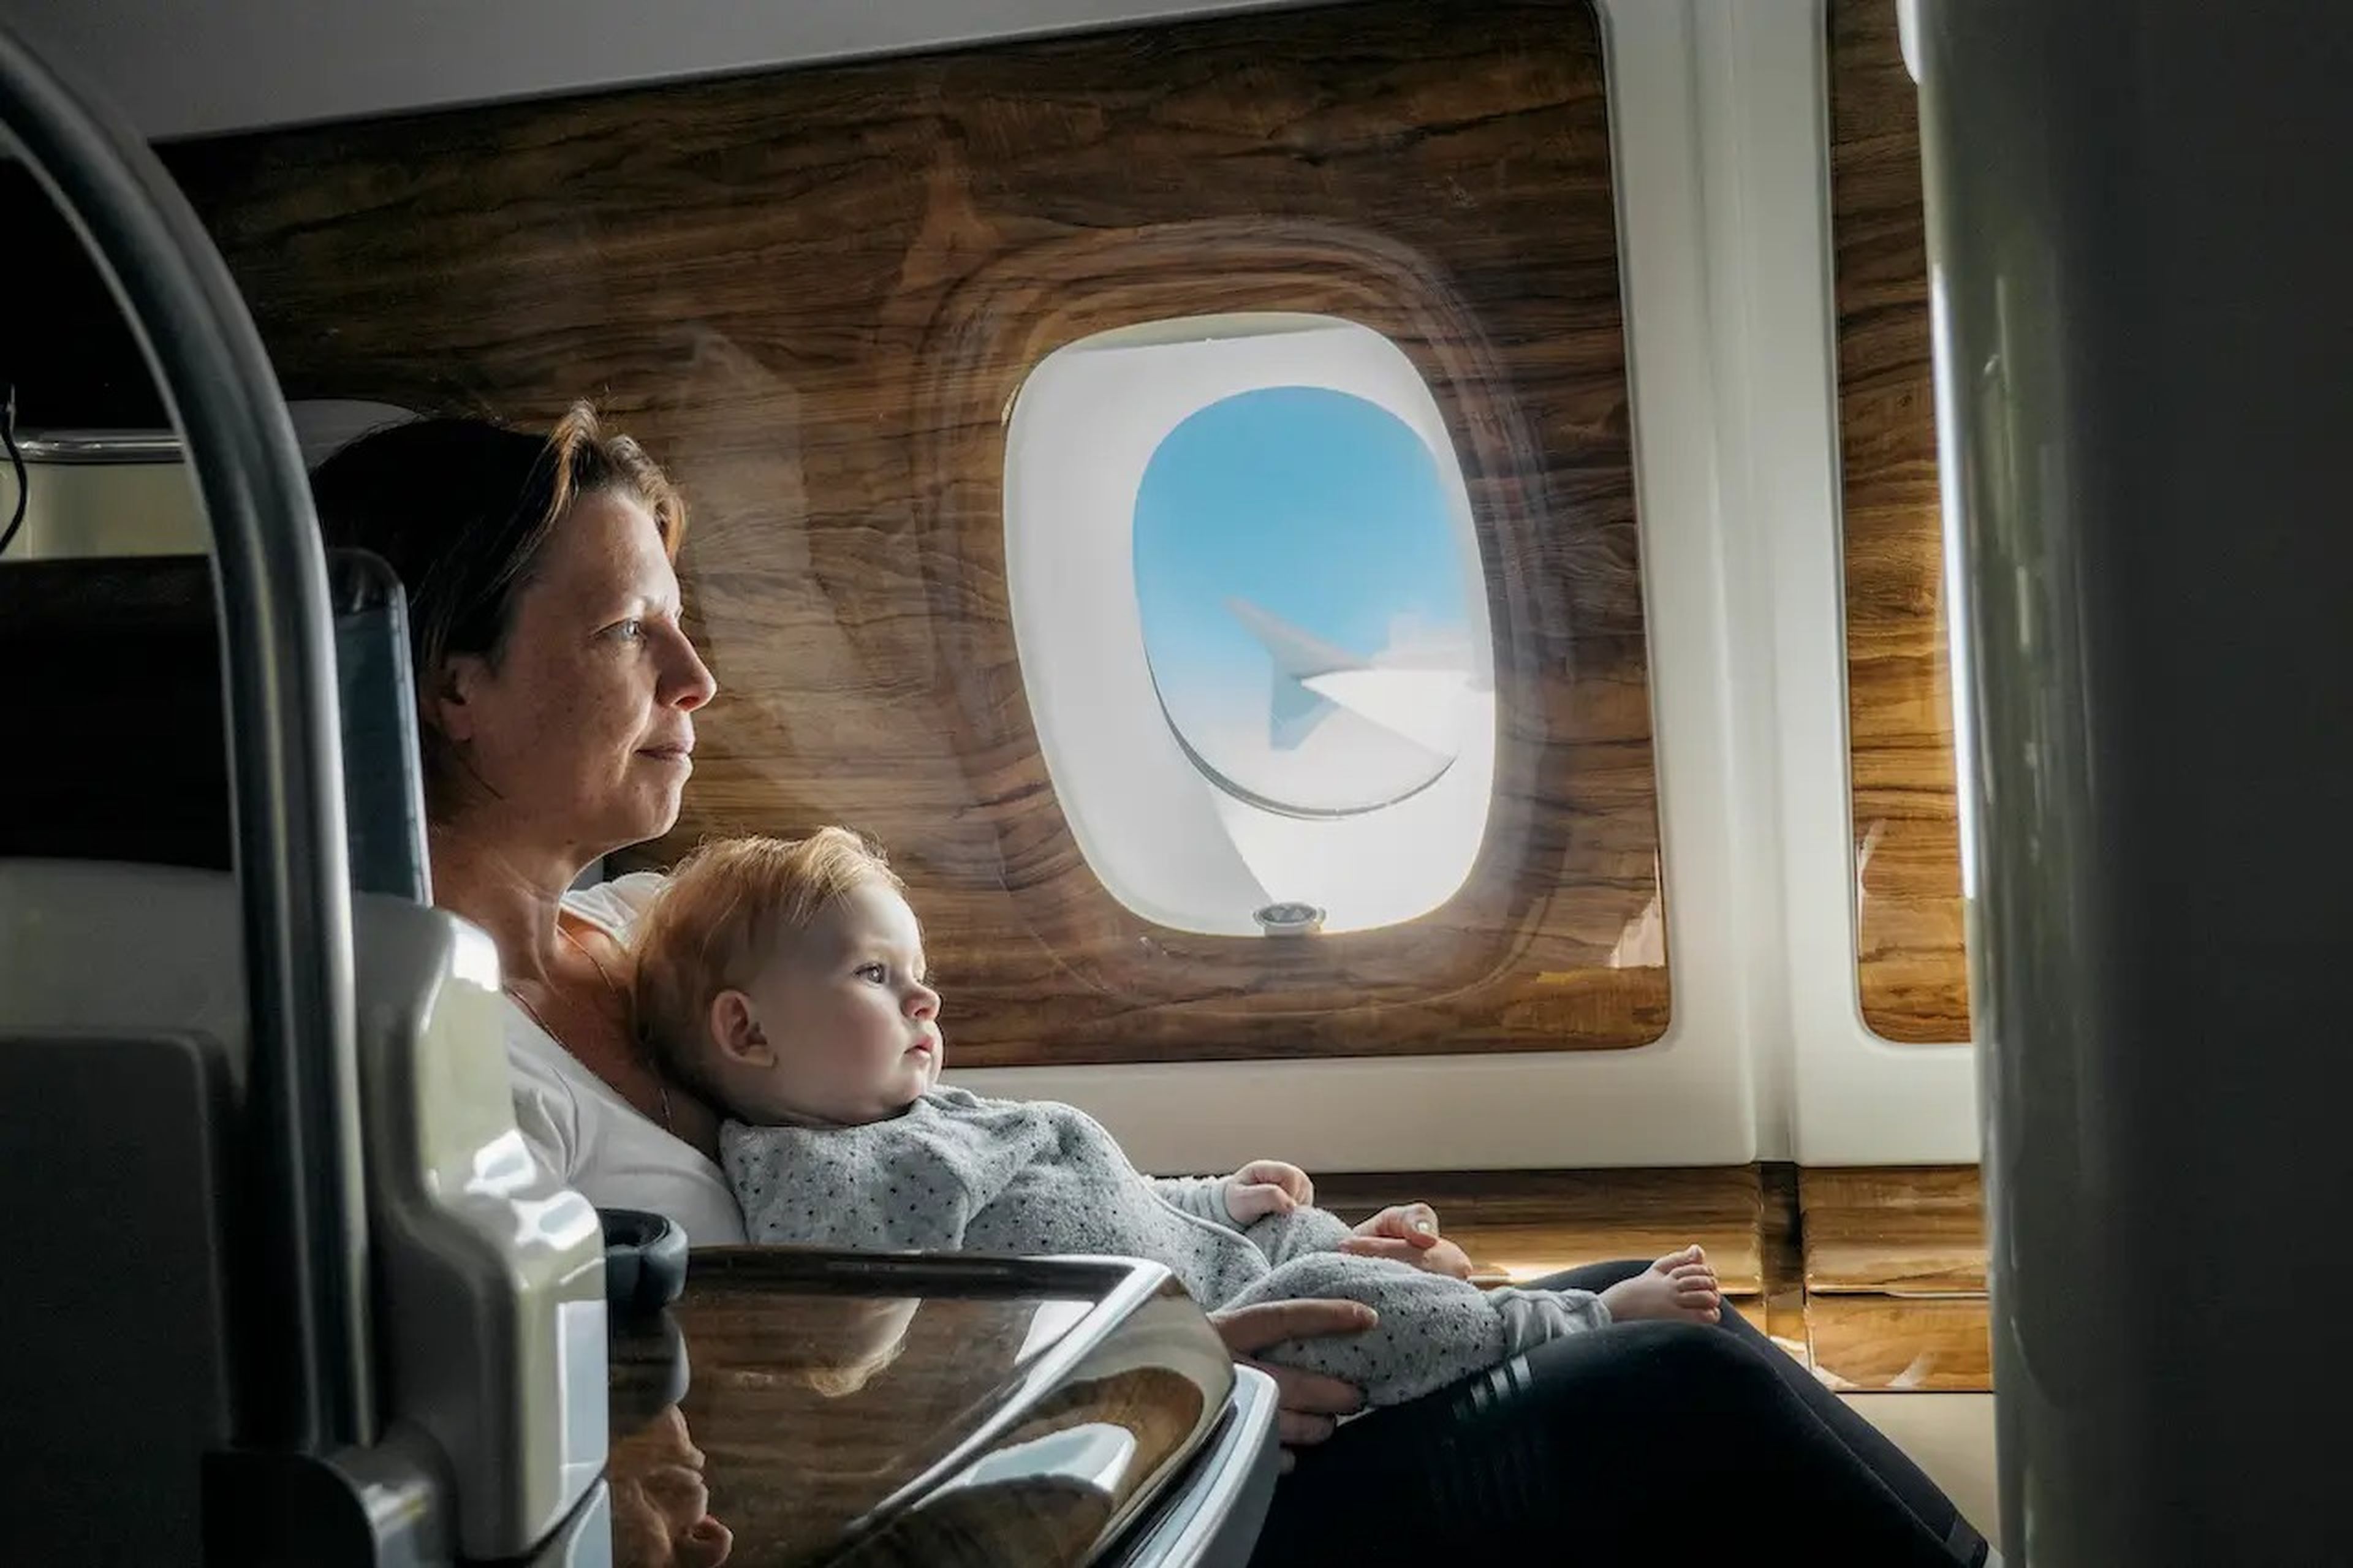 Scheduling flights around a babies schedule can make traveling less stressful.